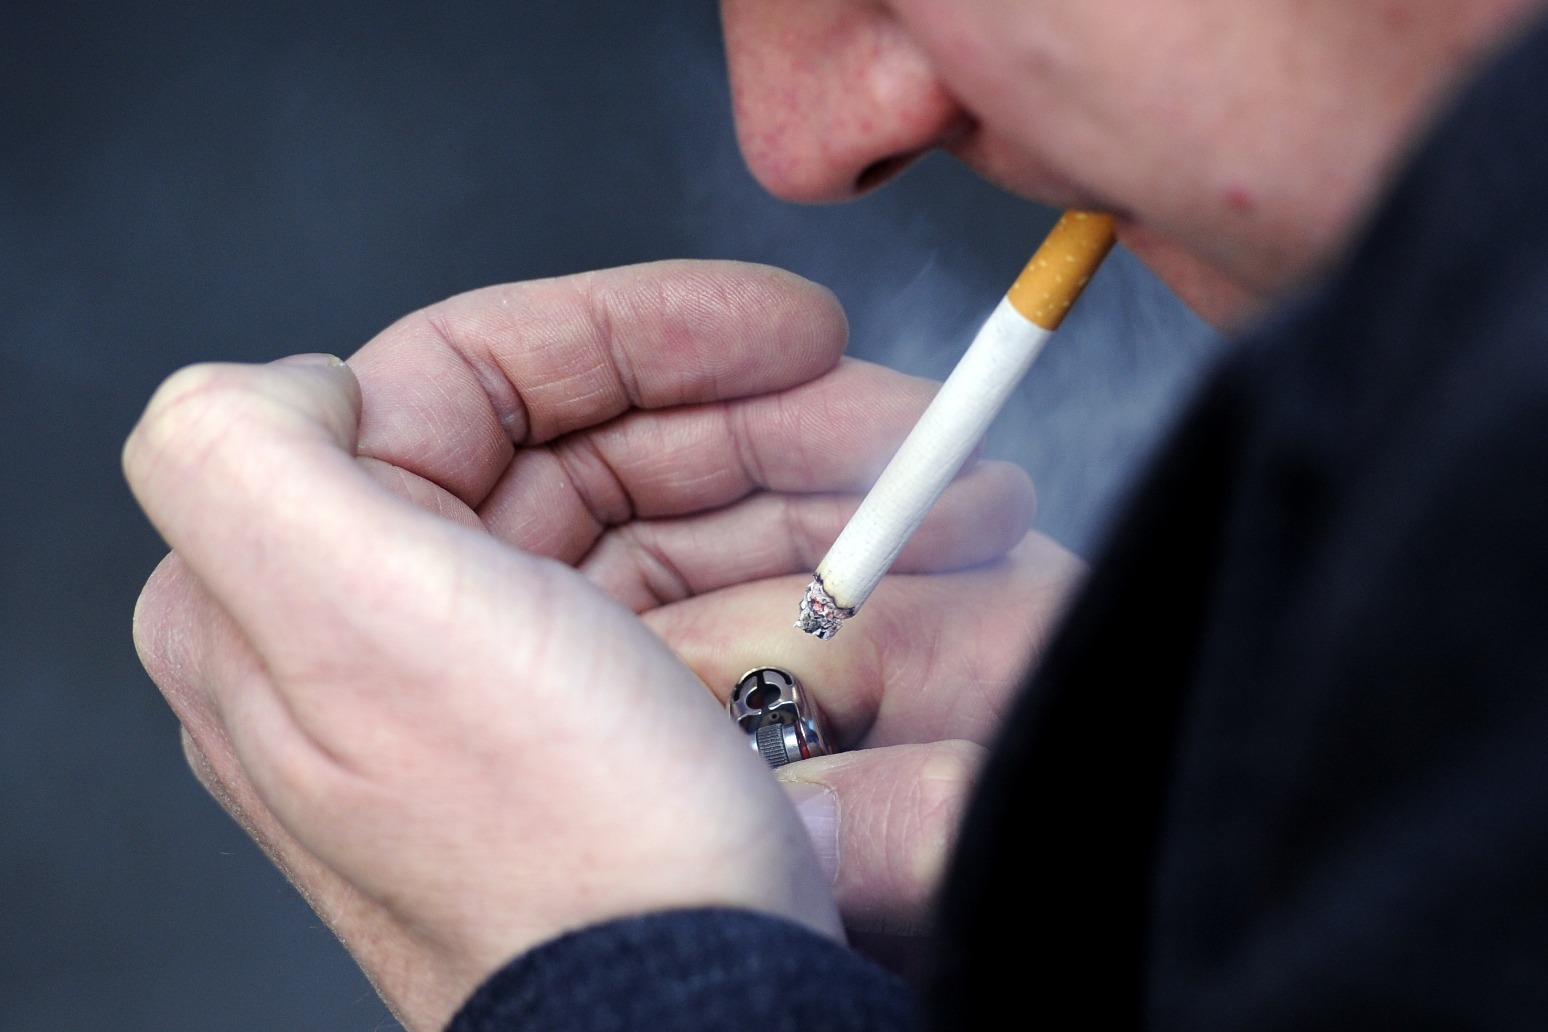 Smoking report could see minimum legal age raised gradually \'year on year\' 